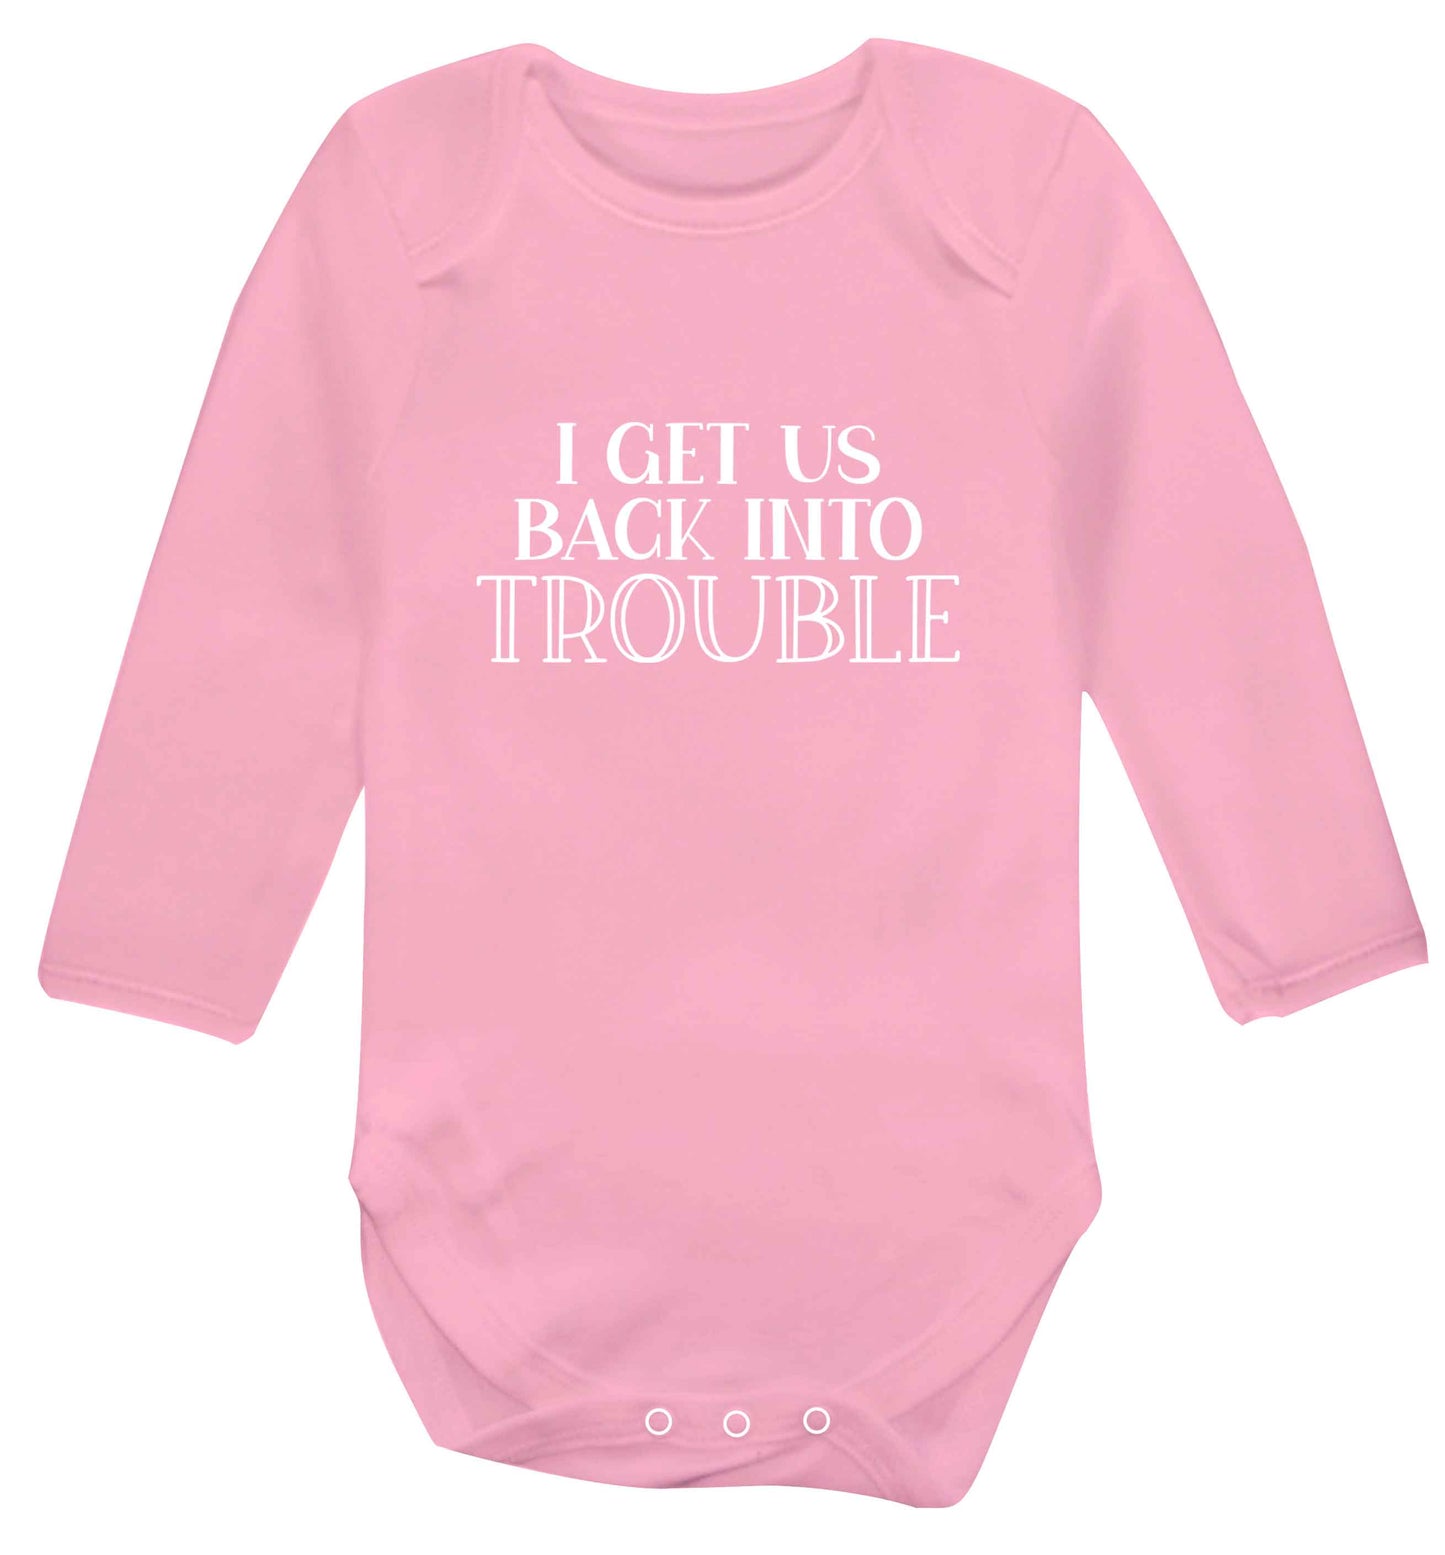 I get us back into trouble baby vest long sleeved pale pink 6-12 months